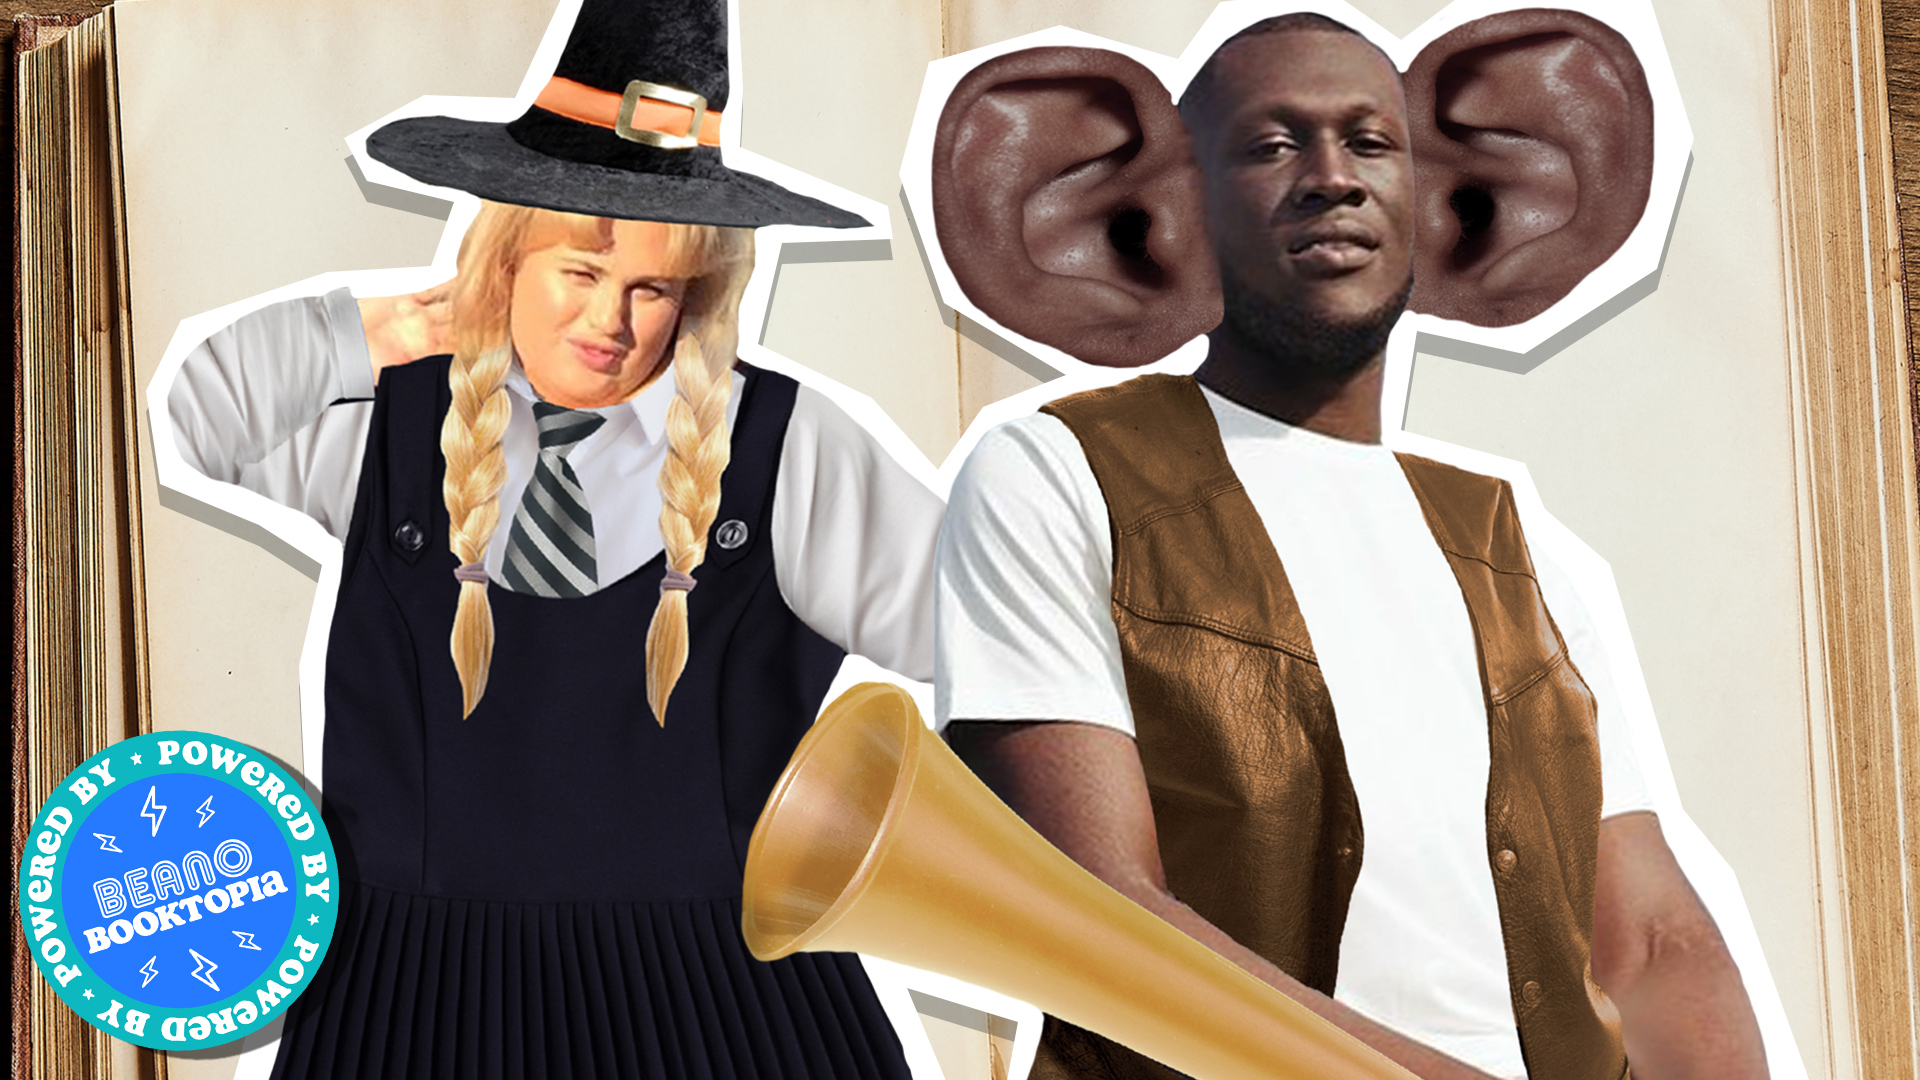 Stormzy BFG and Rebel Wilson as the Worst Witch